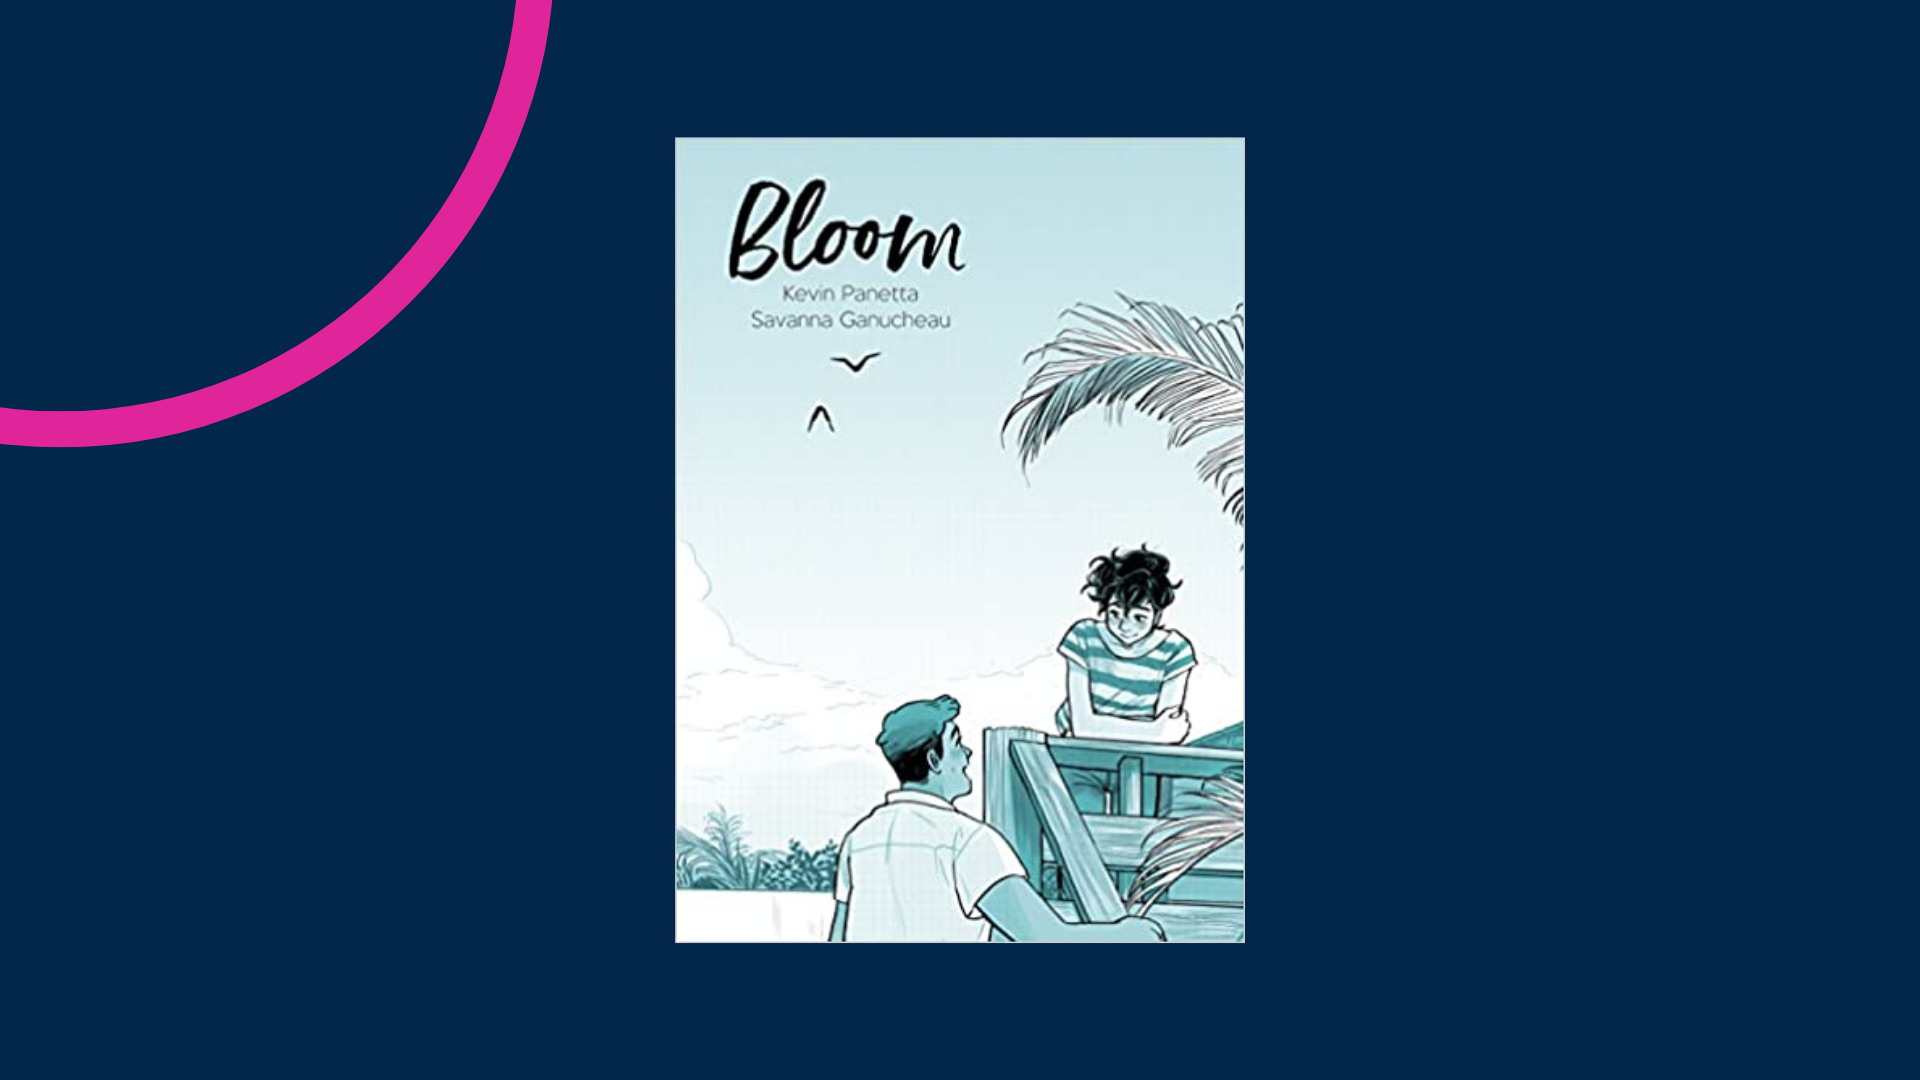 Illustrated cover of Bloom on a graphic background. Book cover depicts two young men looking at each other. One is walking up some stairs, the other is leaning on a wooden fence. Two birds fly overhead.